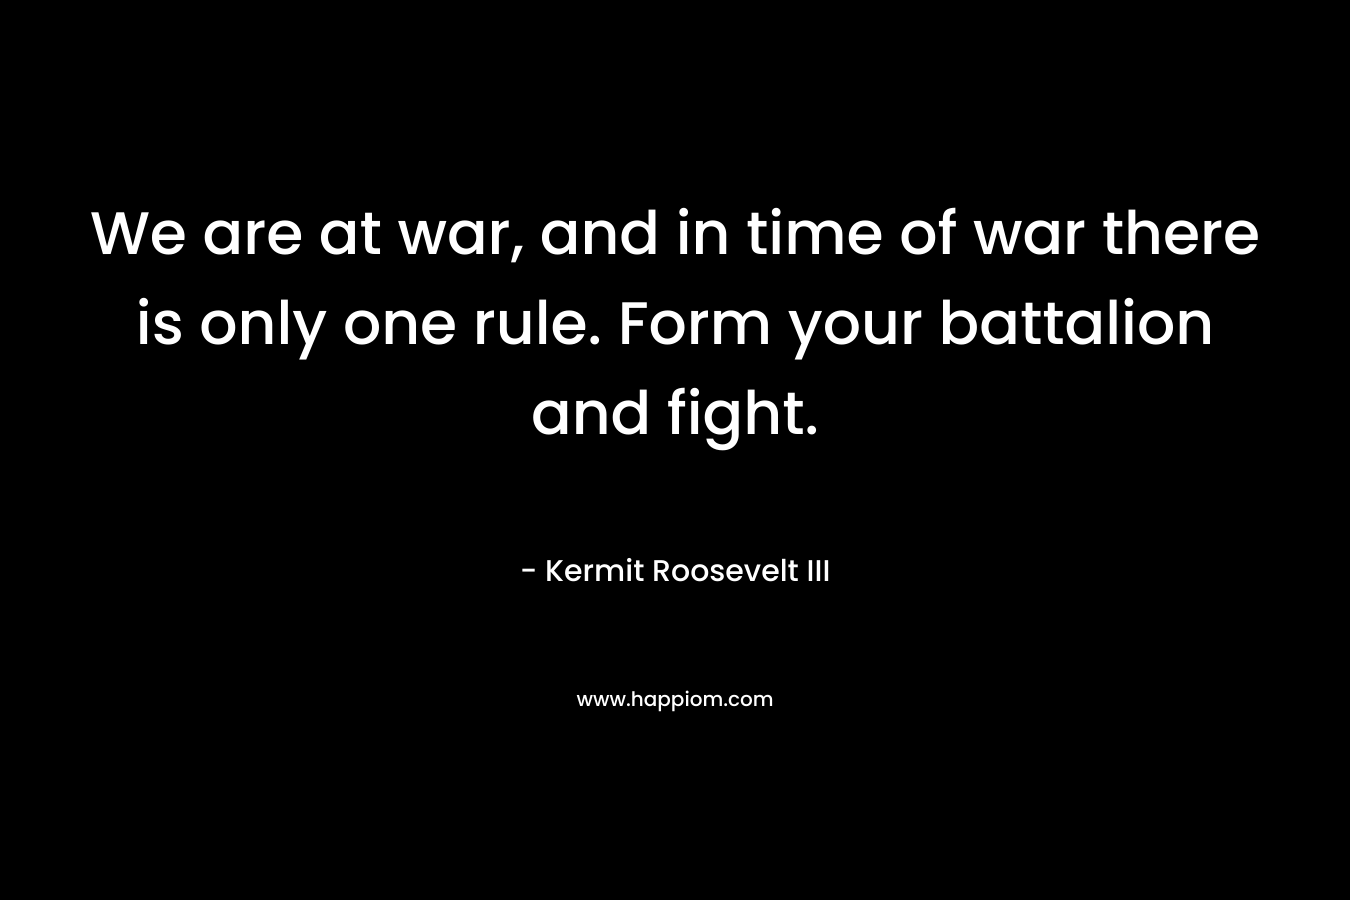 We are at war, and in time of war there is only one rule. Form your battalion and fight. – Kermit Roosevelt III